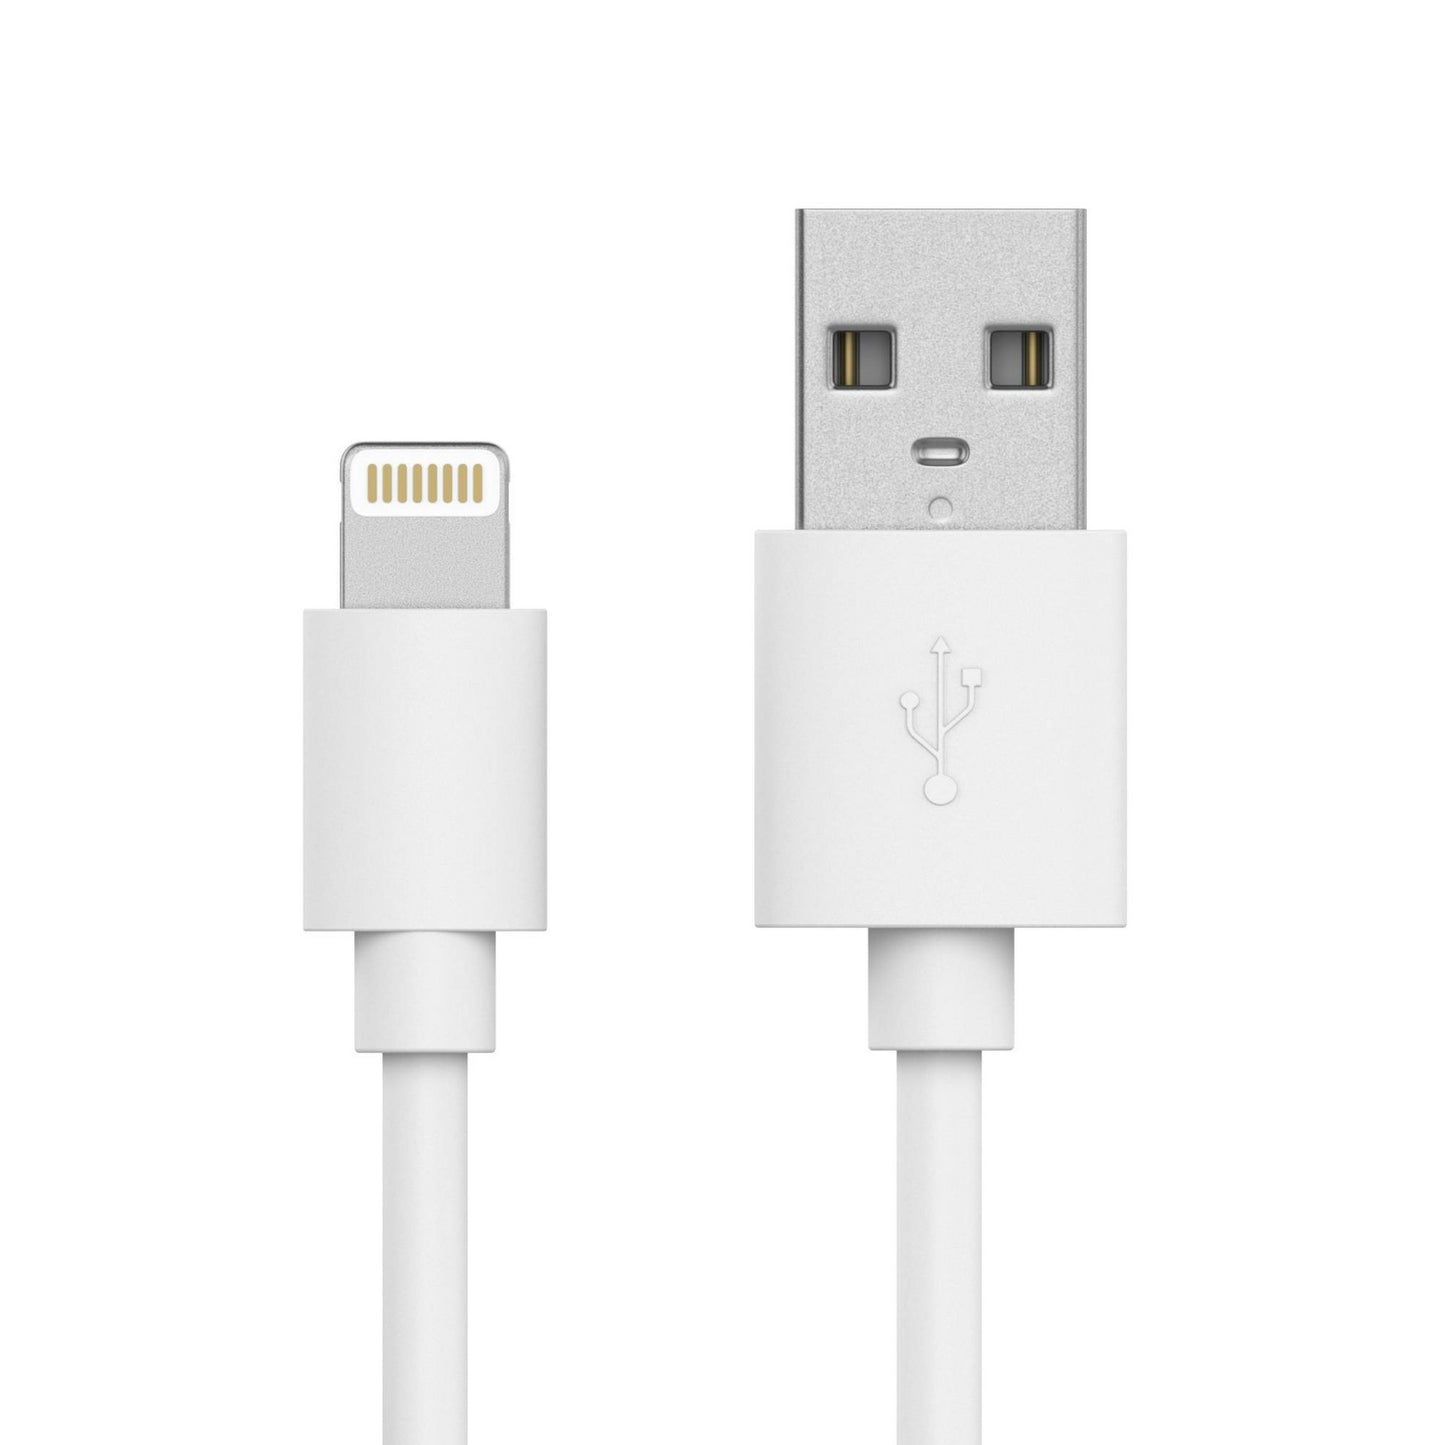 USB to iPhone charging cable Vietnam 1.8 meters from just wireless